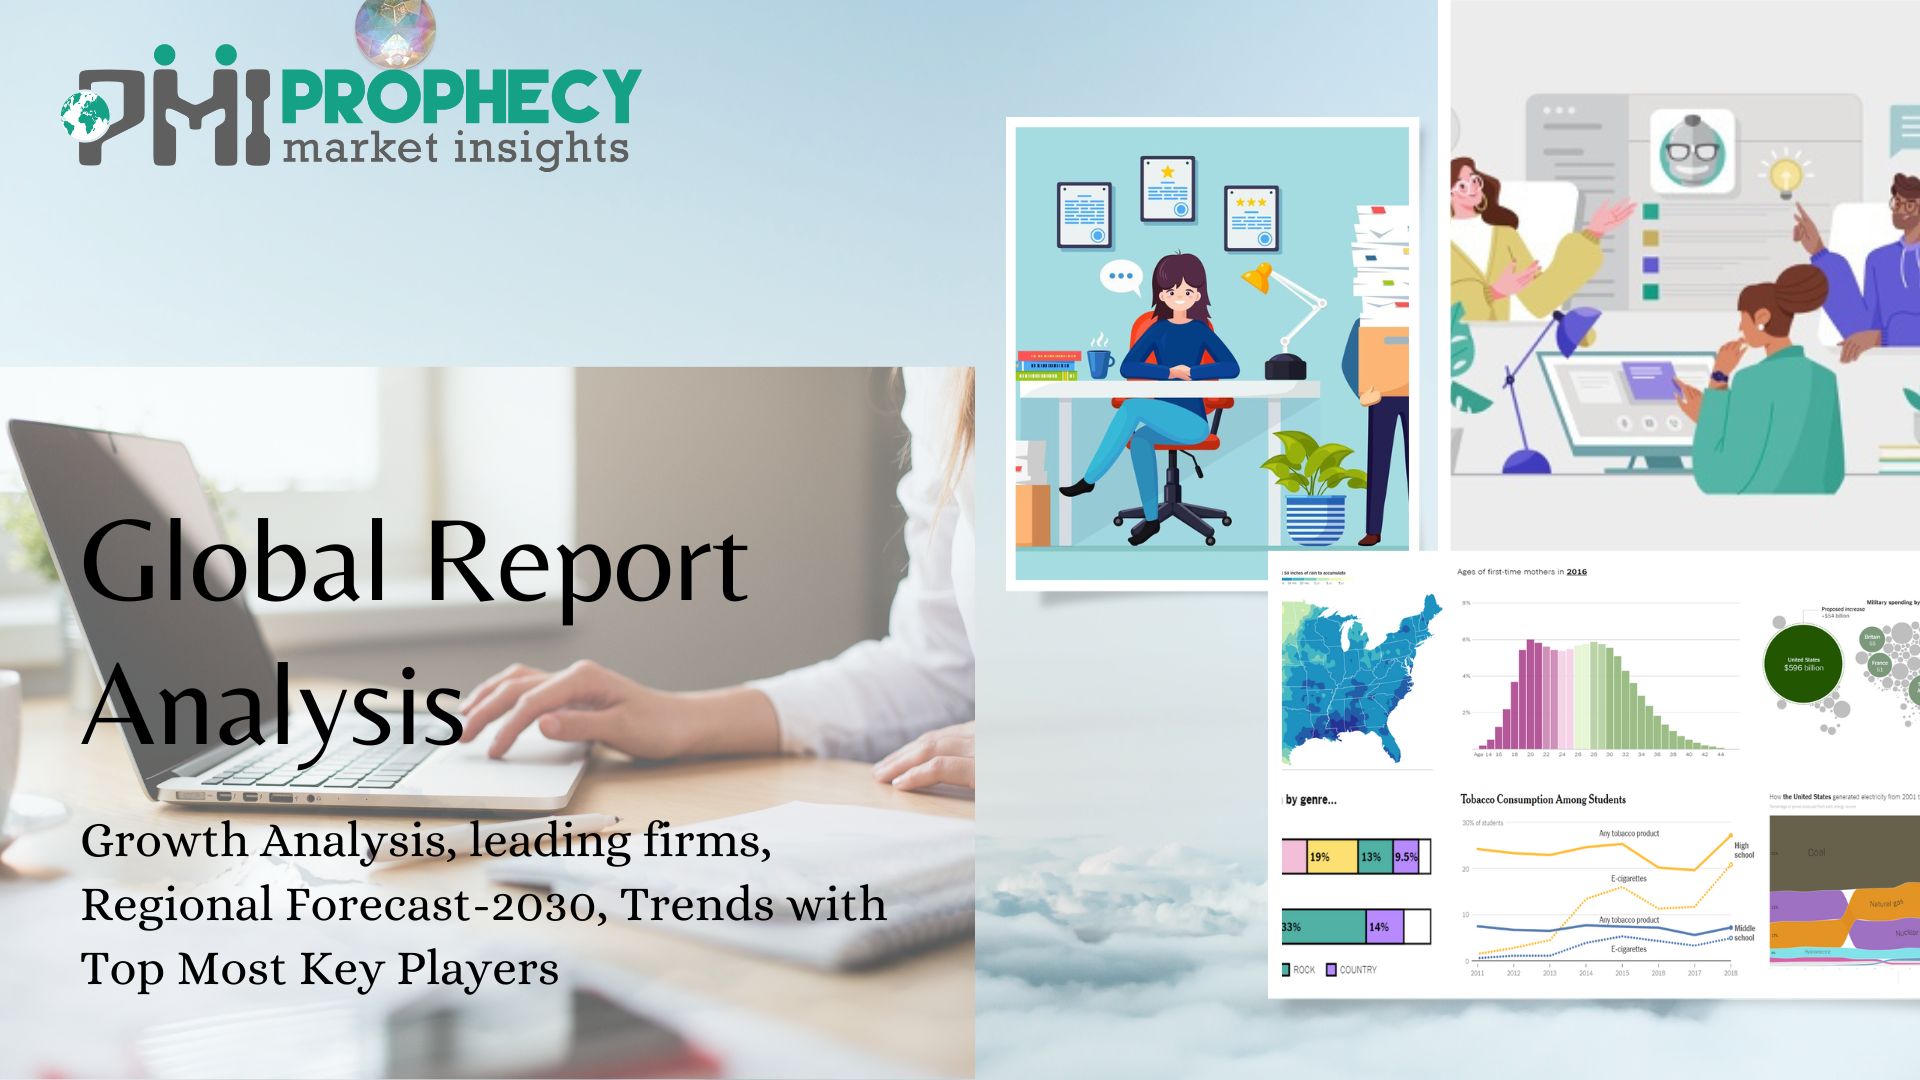 Growth Analysis, leading firms, Regional Forecast-2030, Trends with Top Most Key Players-6b2d2811